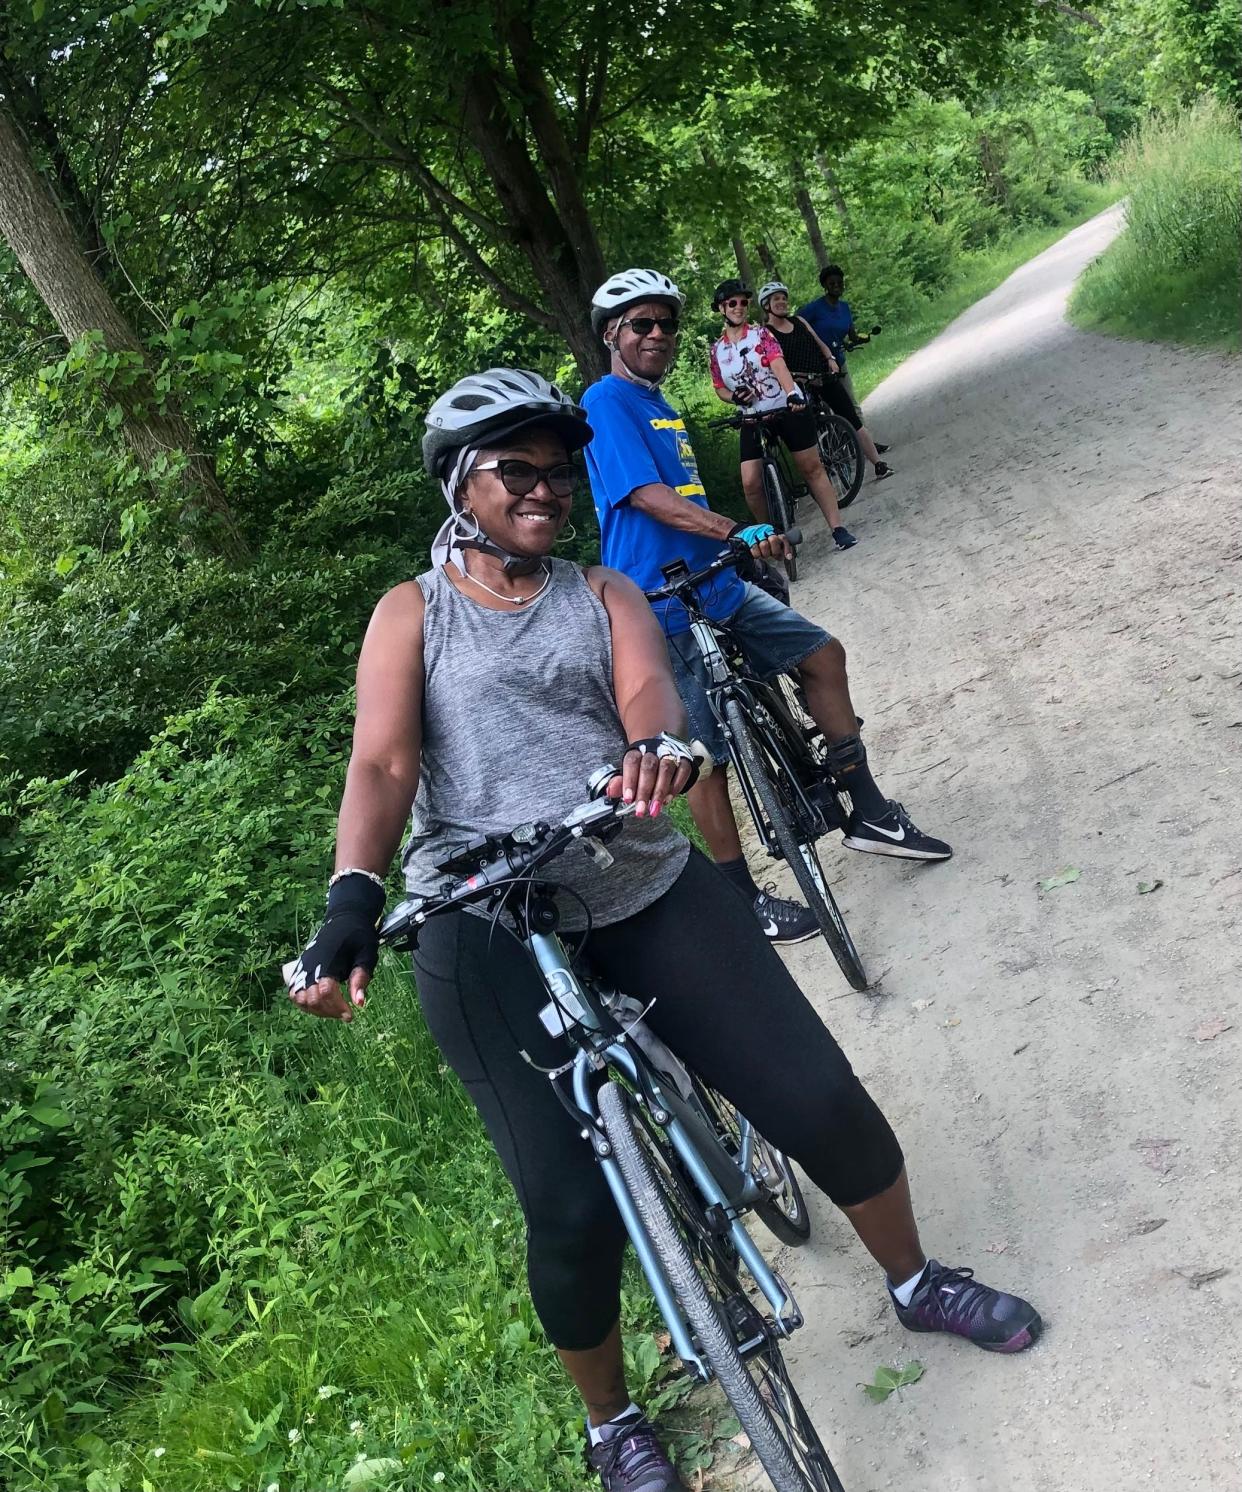 Bicyclists ride along the Towpath Trail, which is part of the Ohio & Erie Canalway.